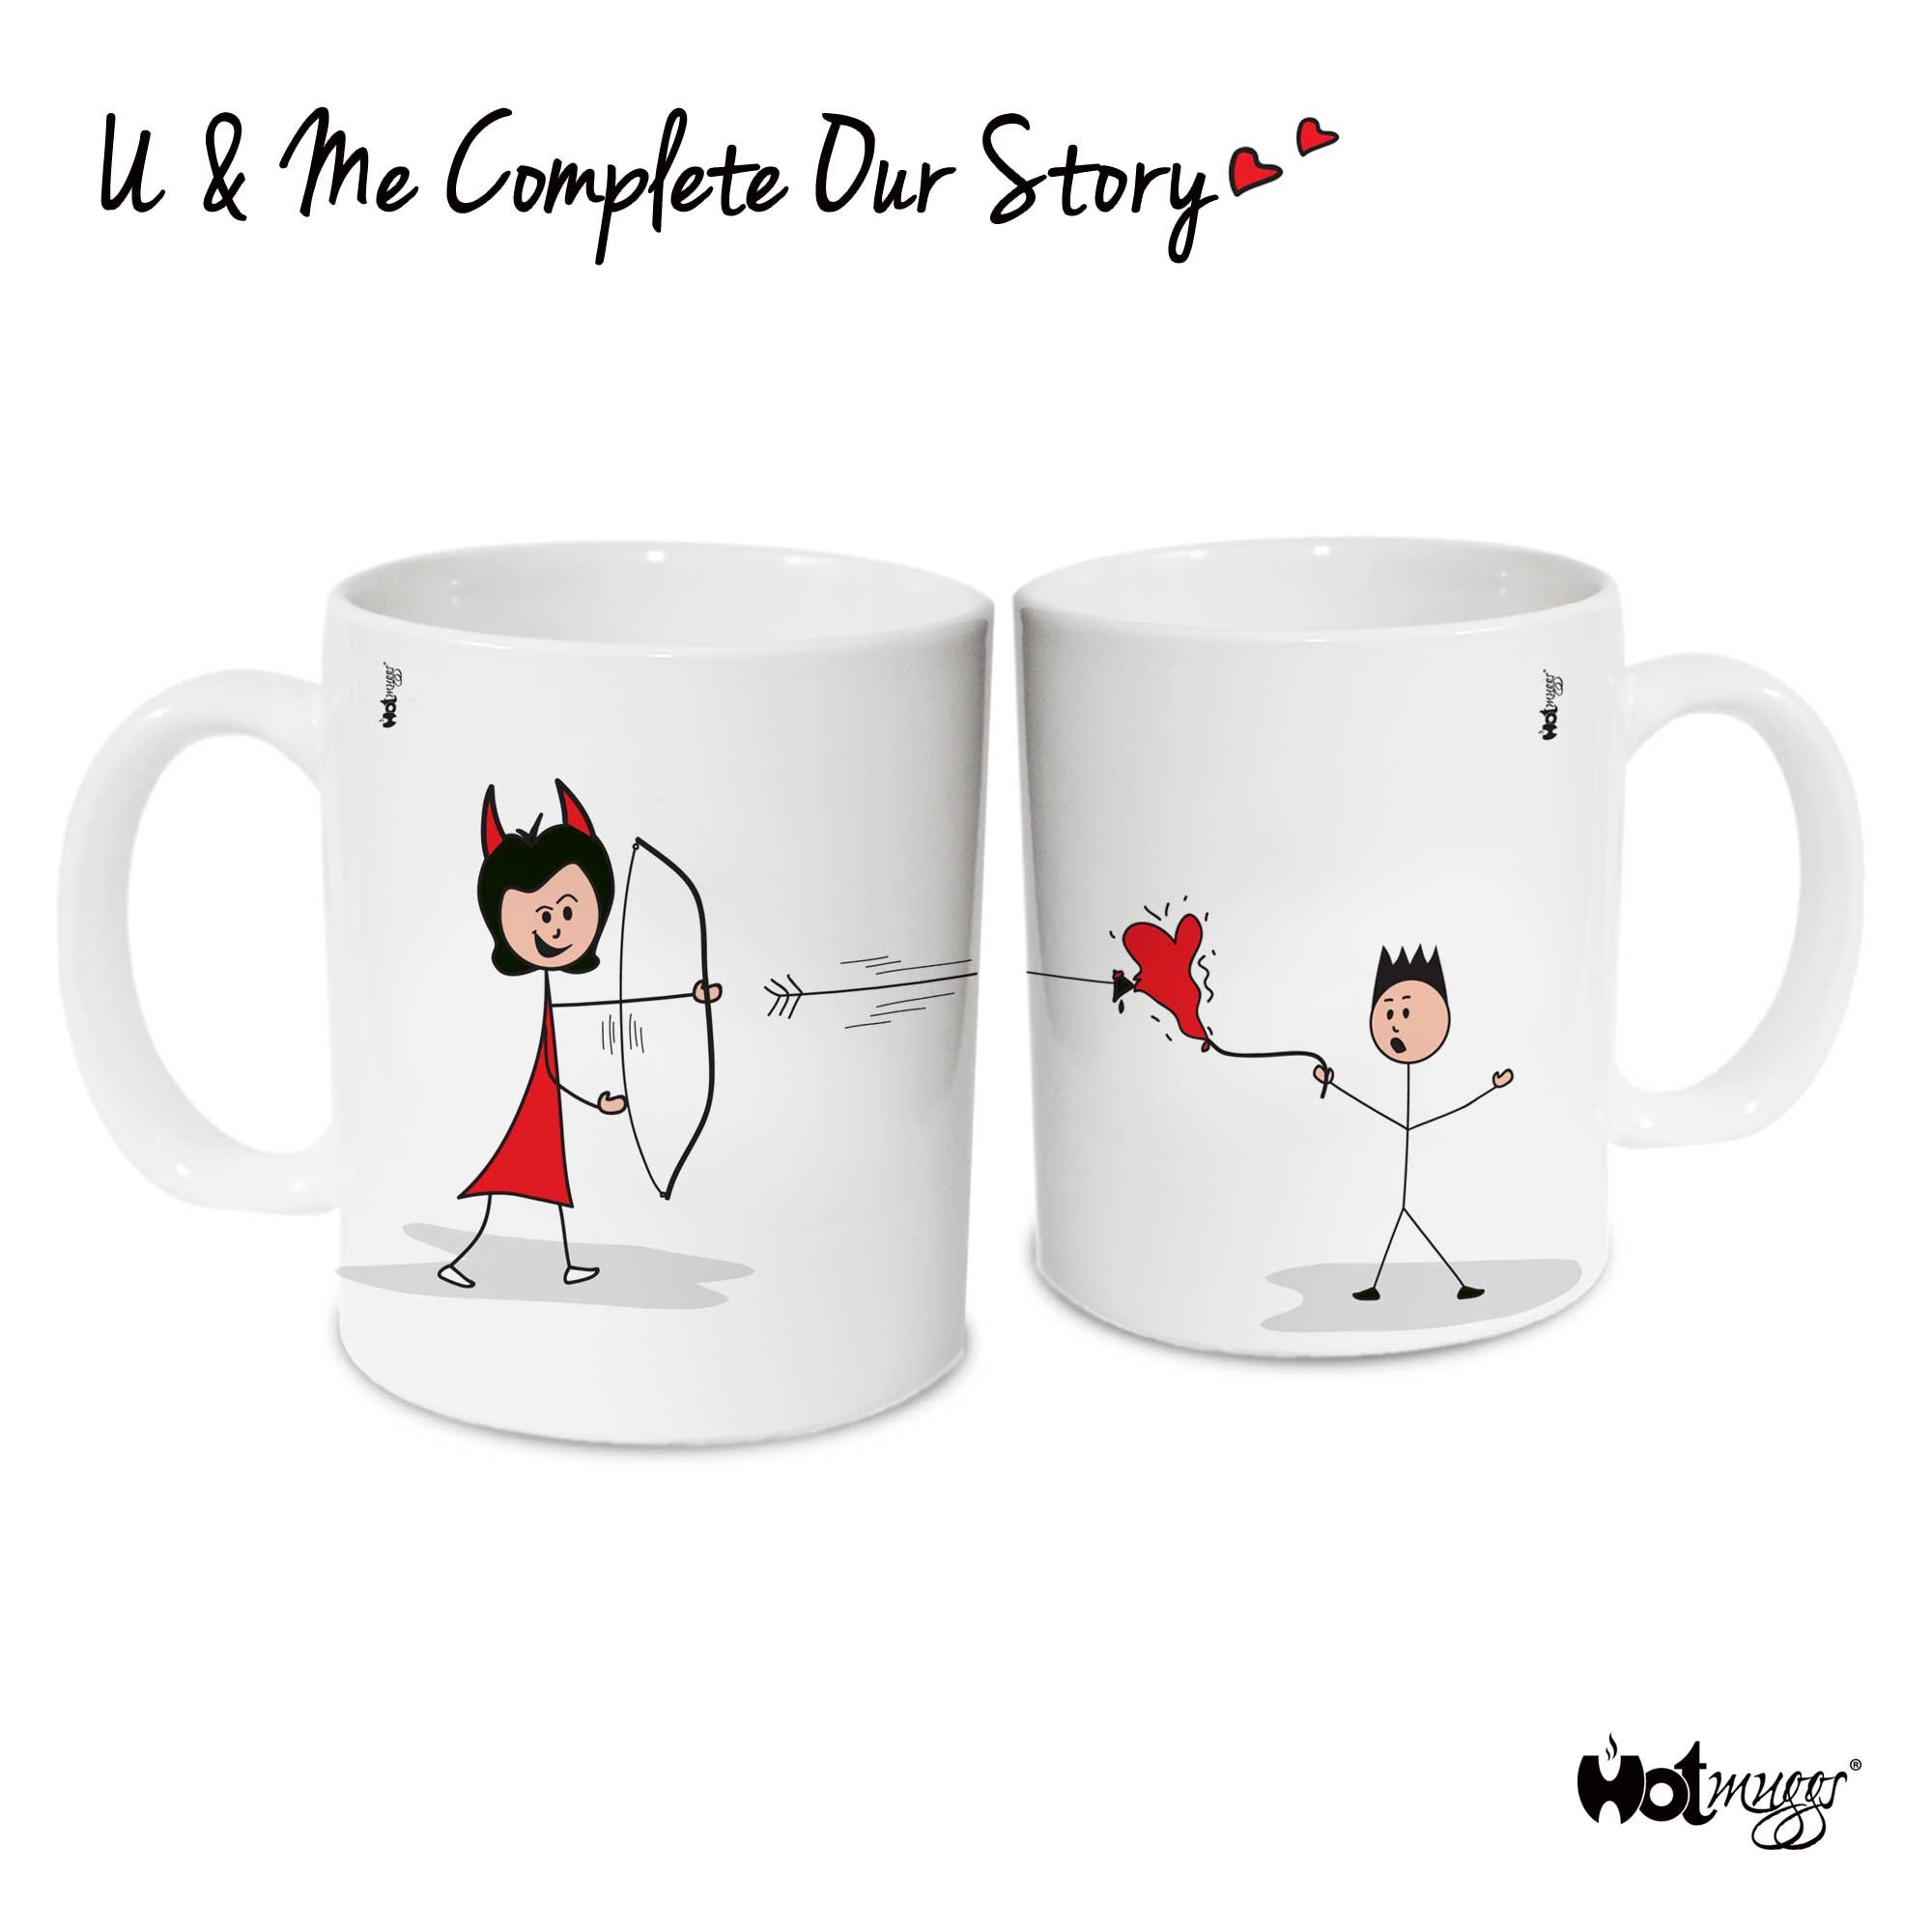 U & Me Complete Our Story - Bull's Eye